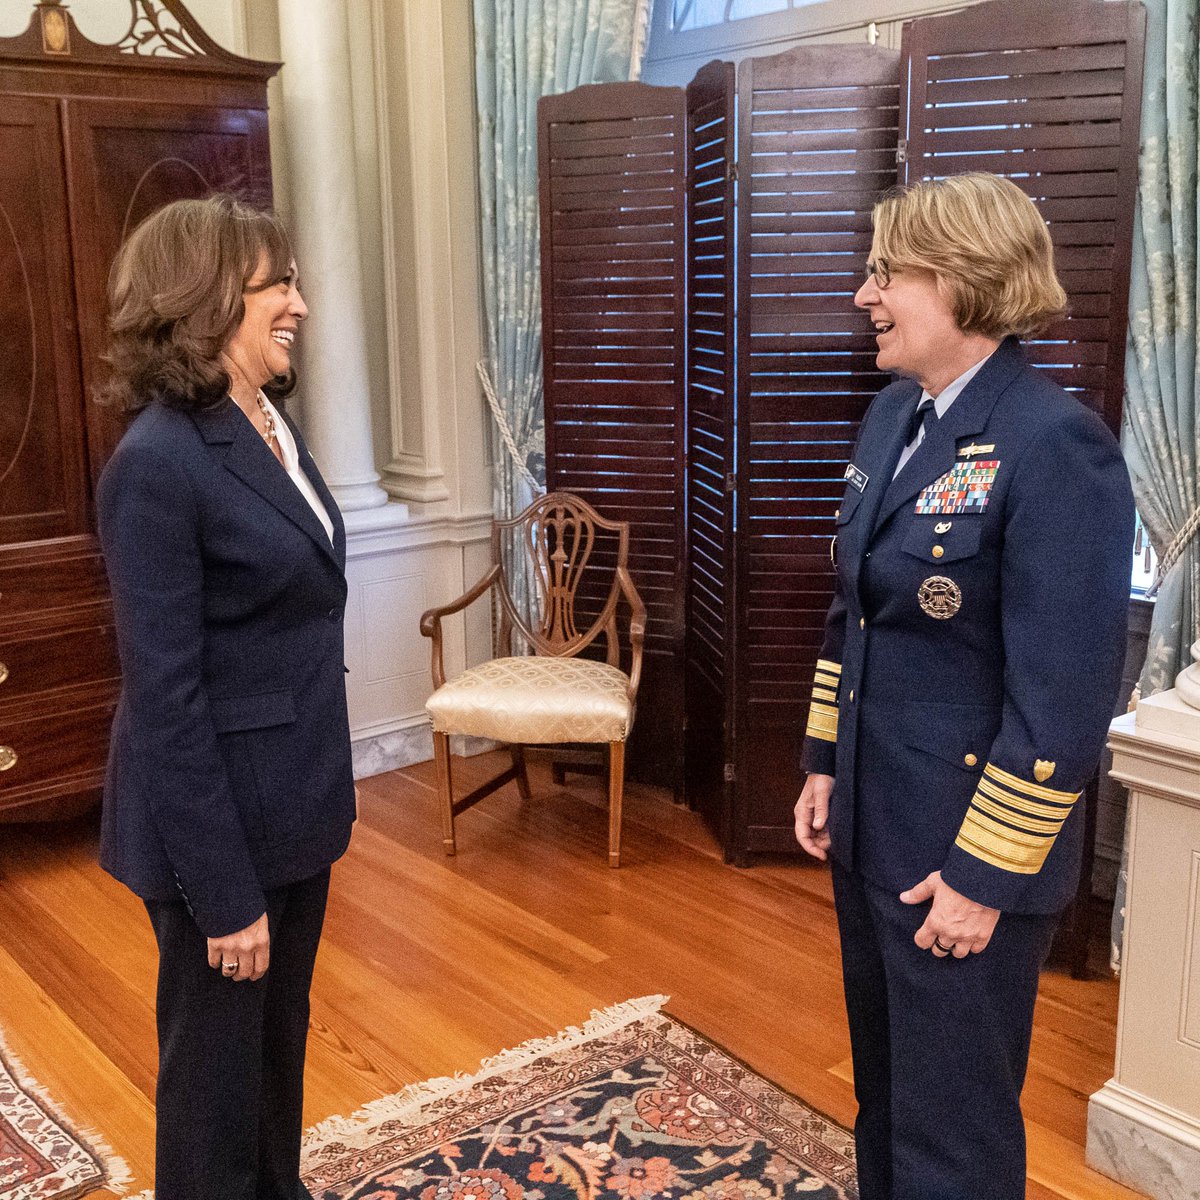 Never in the history of the United States has a woman led a branch of the armed forces. Today Adm. Linda Fagan made history. Congratulations to the new Commandant of the @USCG.